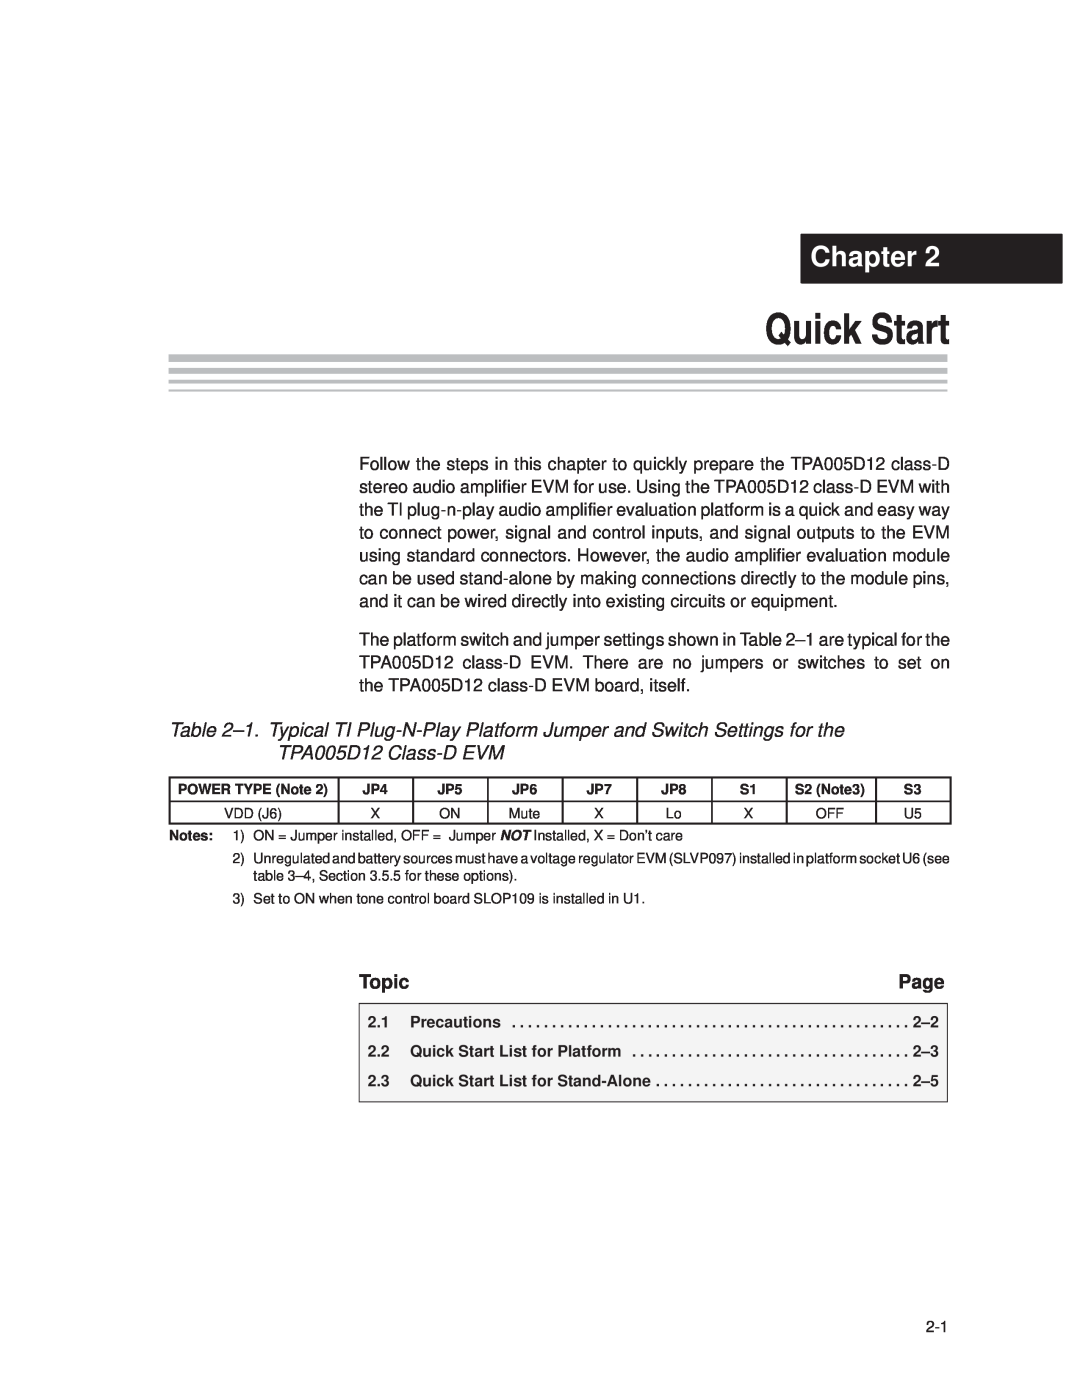 Texas Instruments TPA005D12 manual Chapter, Page, Topic, Precautions, Quick Start List for Platform 